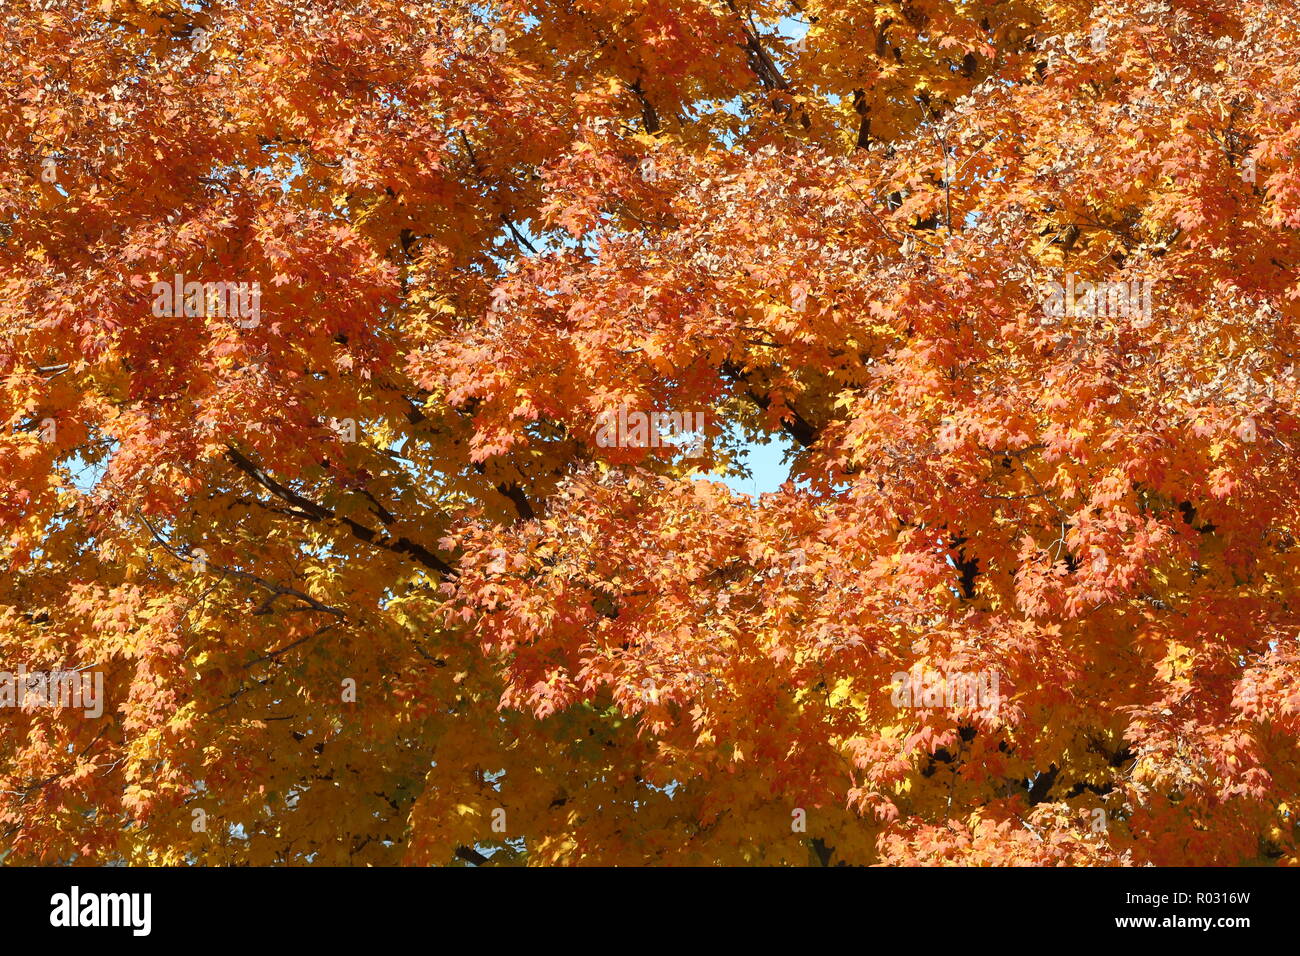 Fall leaves - Fall colors with no background, orange fall leaves Stock Photo